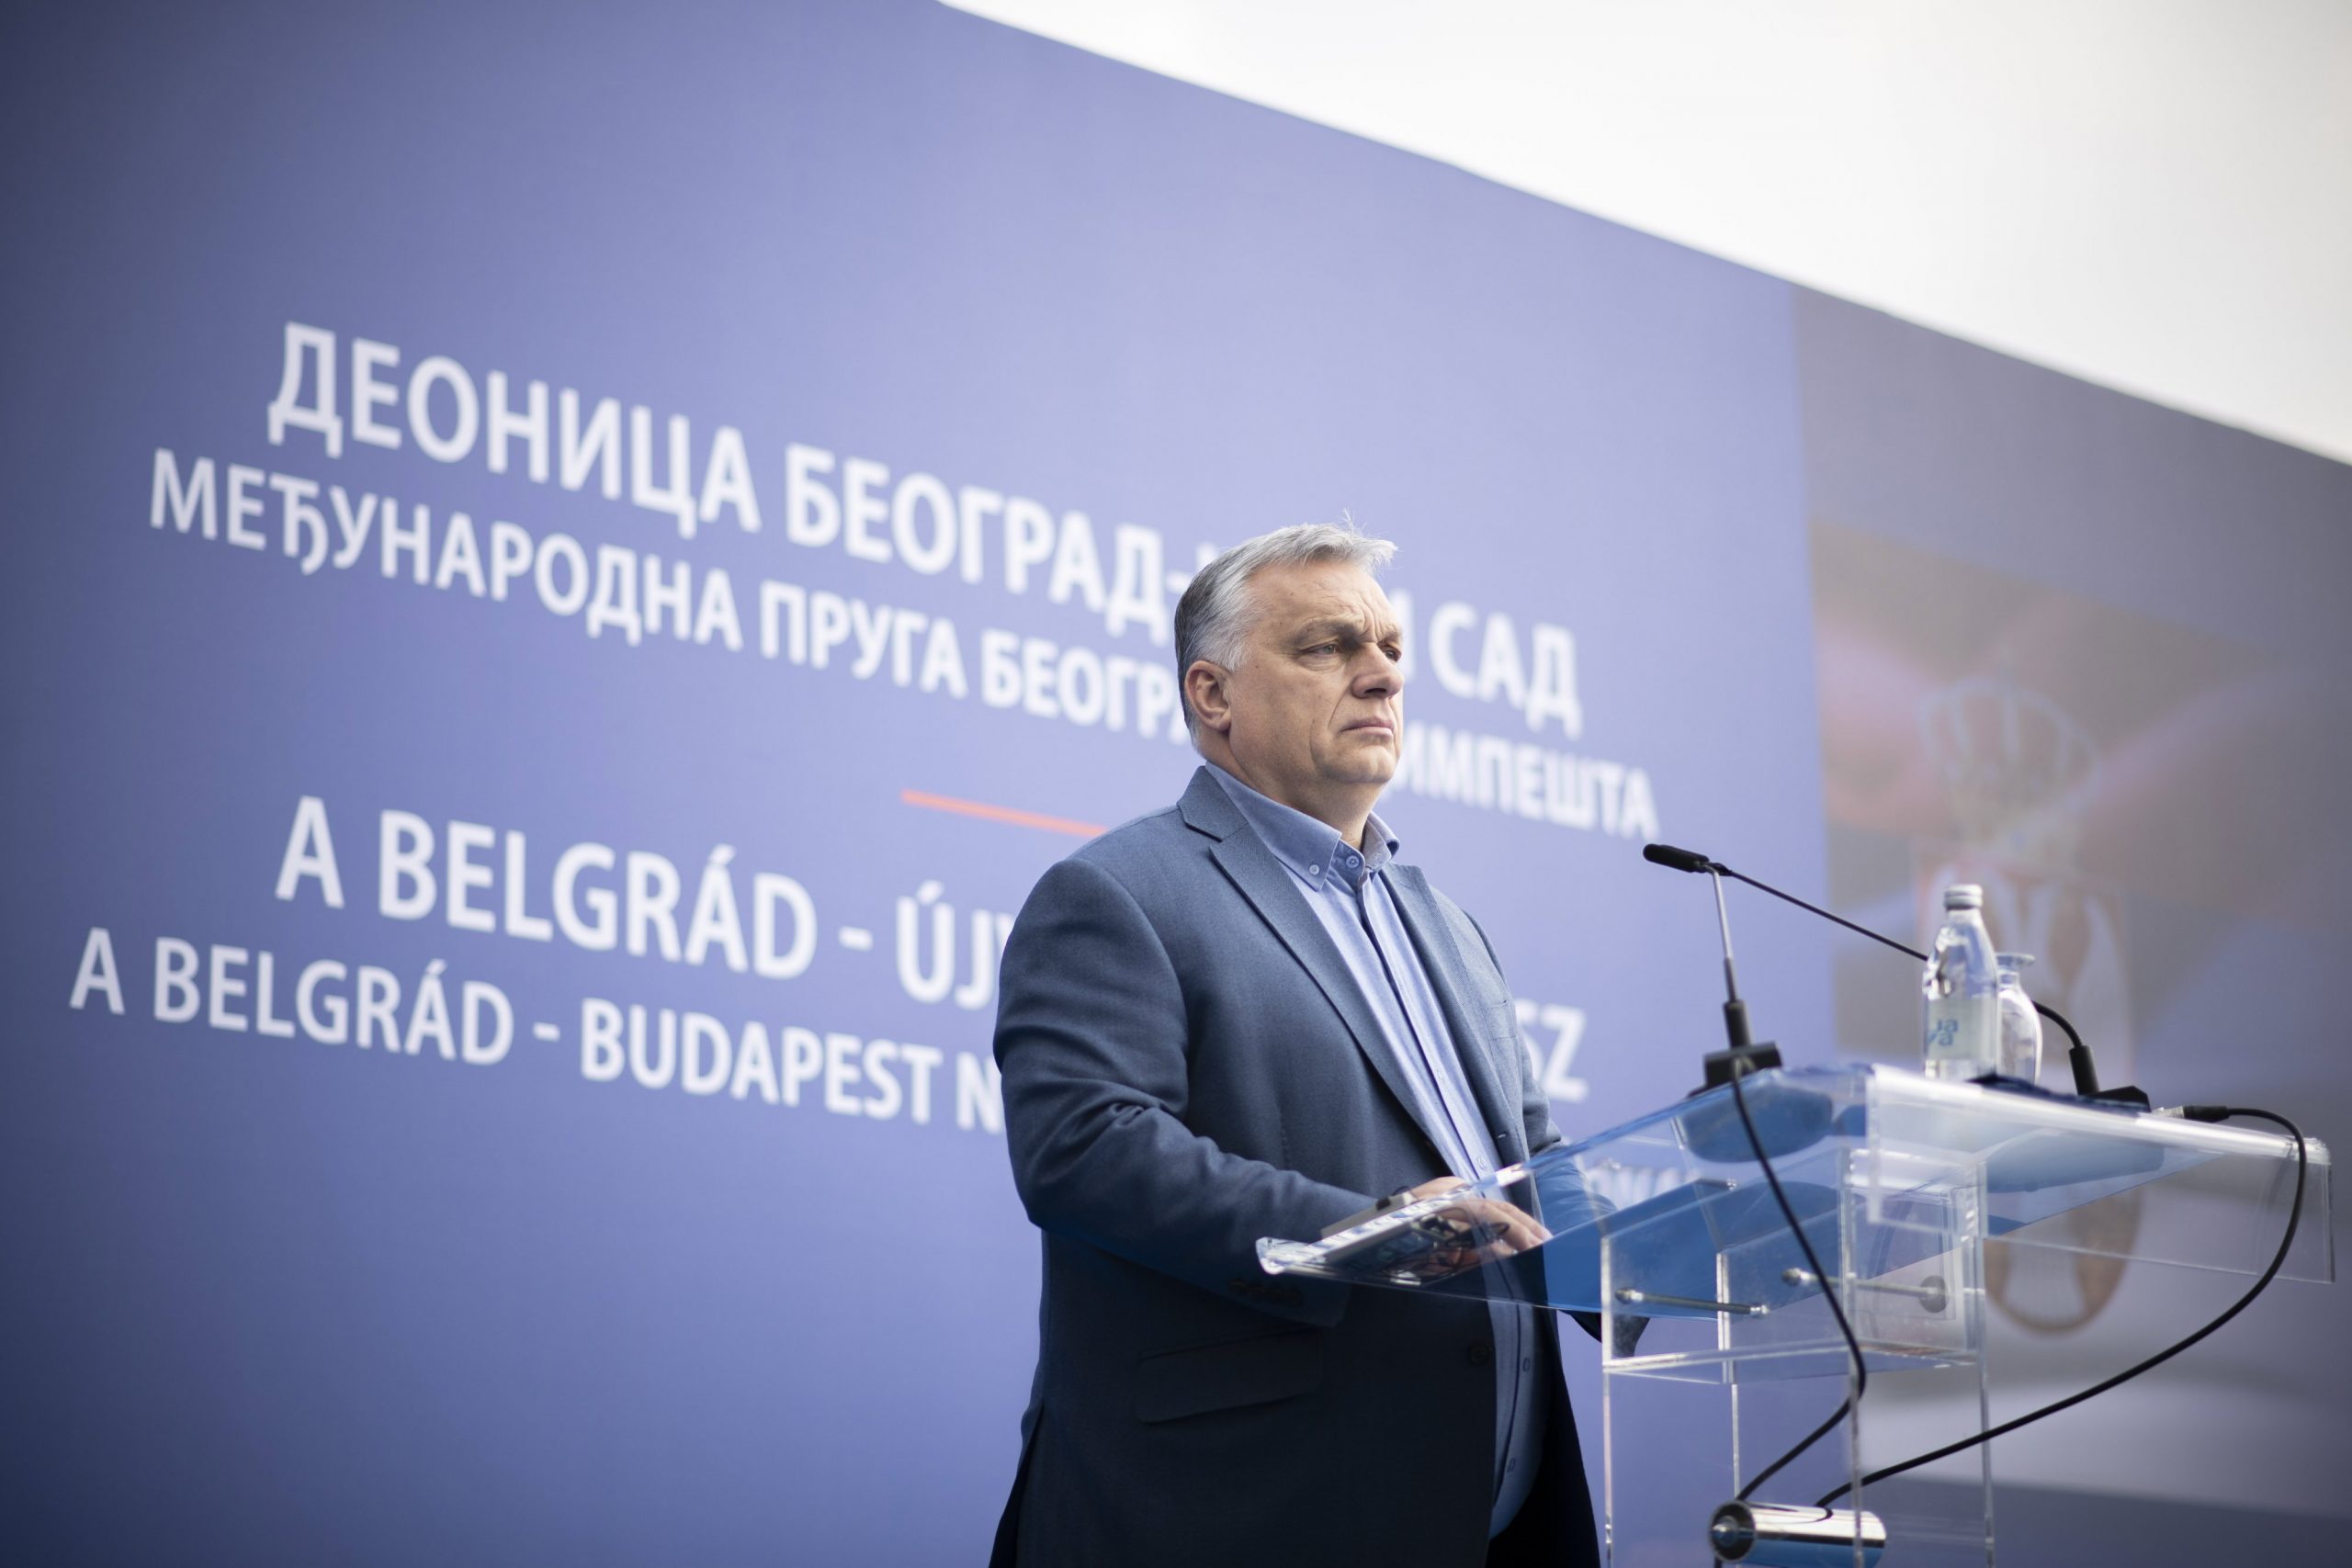 PM Orbán in Serbia: We Will Preserve Peace and Serbian-Hungarian Friendship